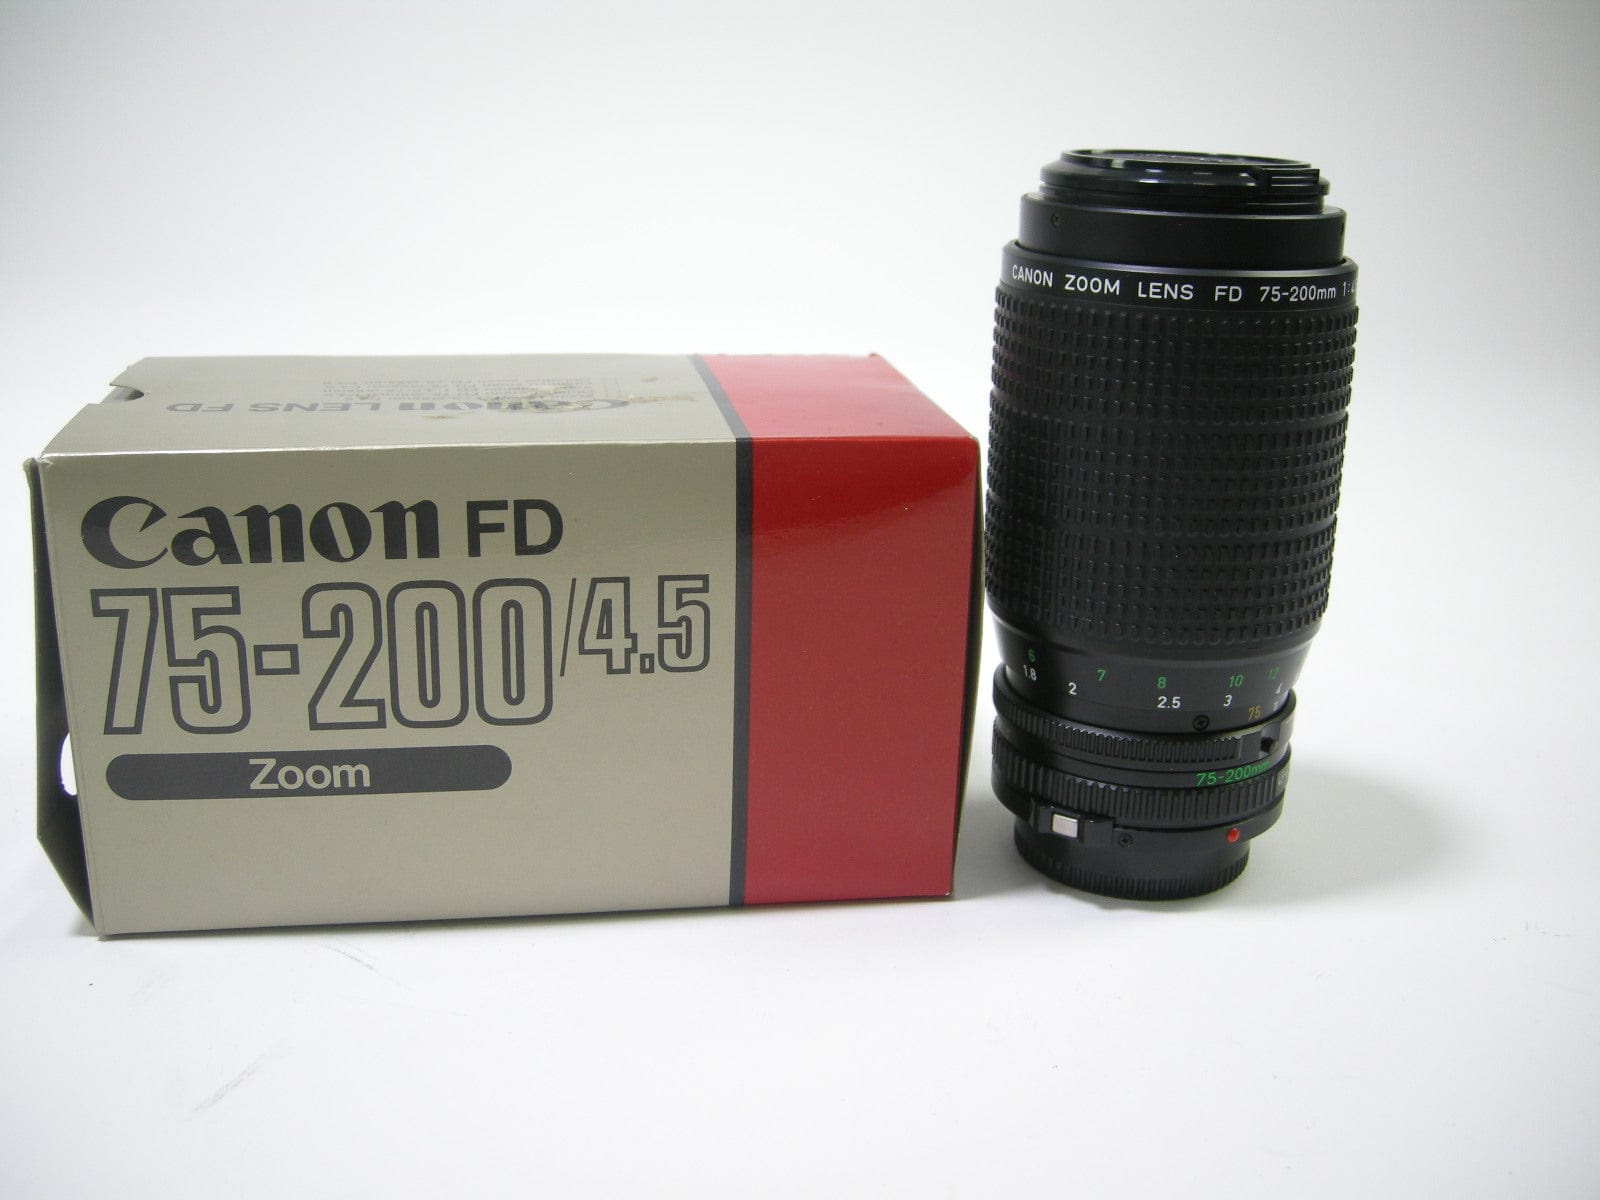 Canon FD Zoom 75-200mm f4.5 lens